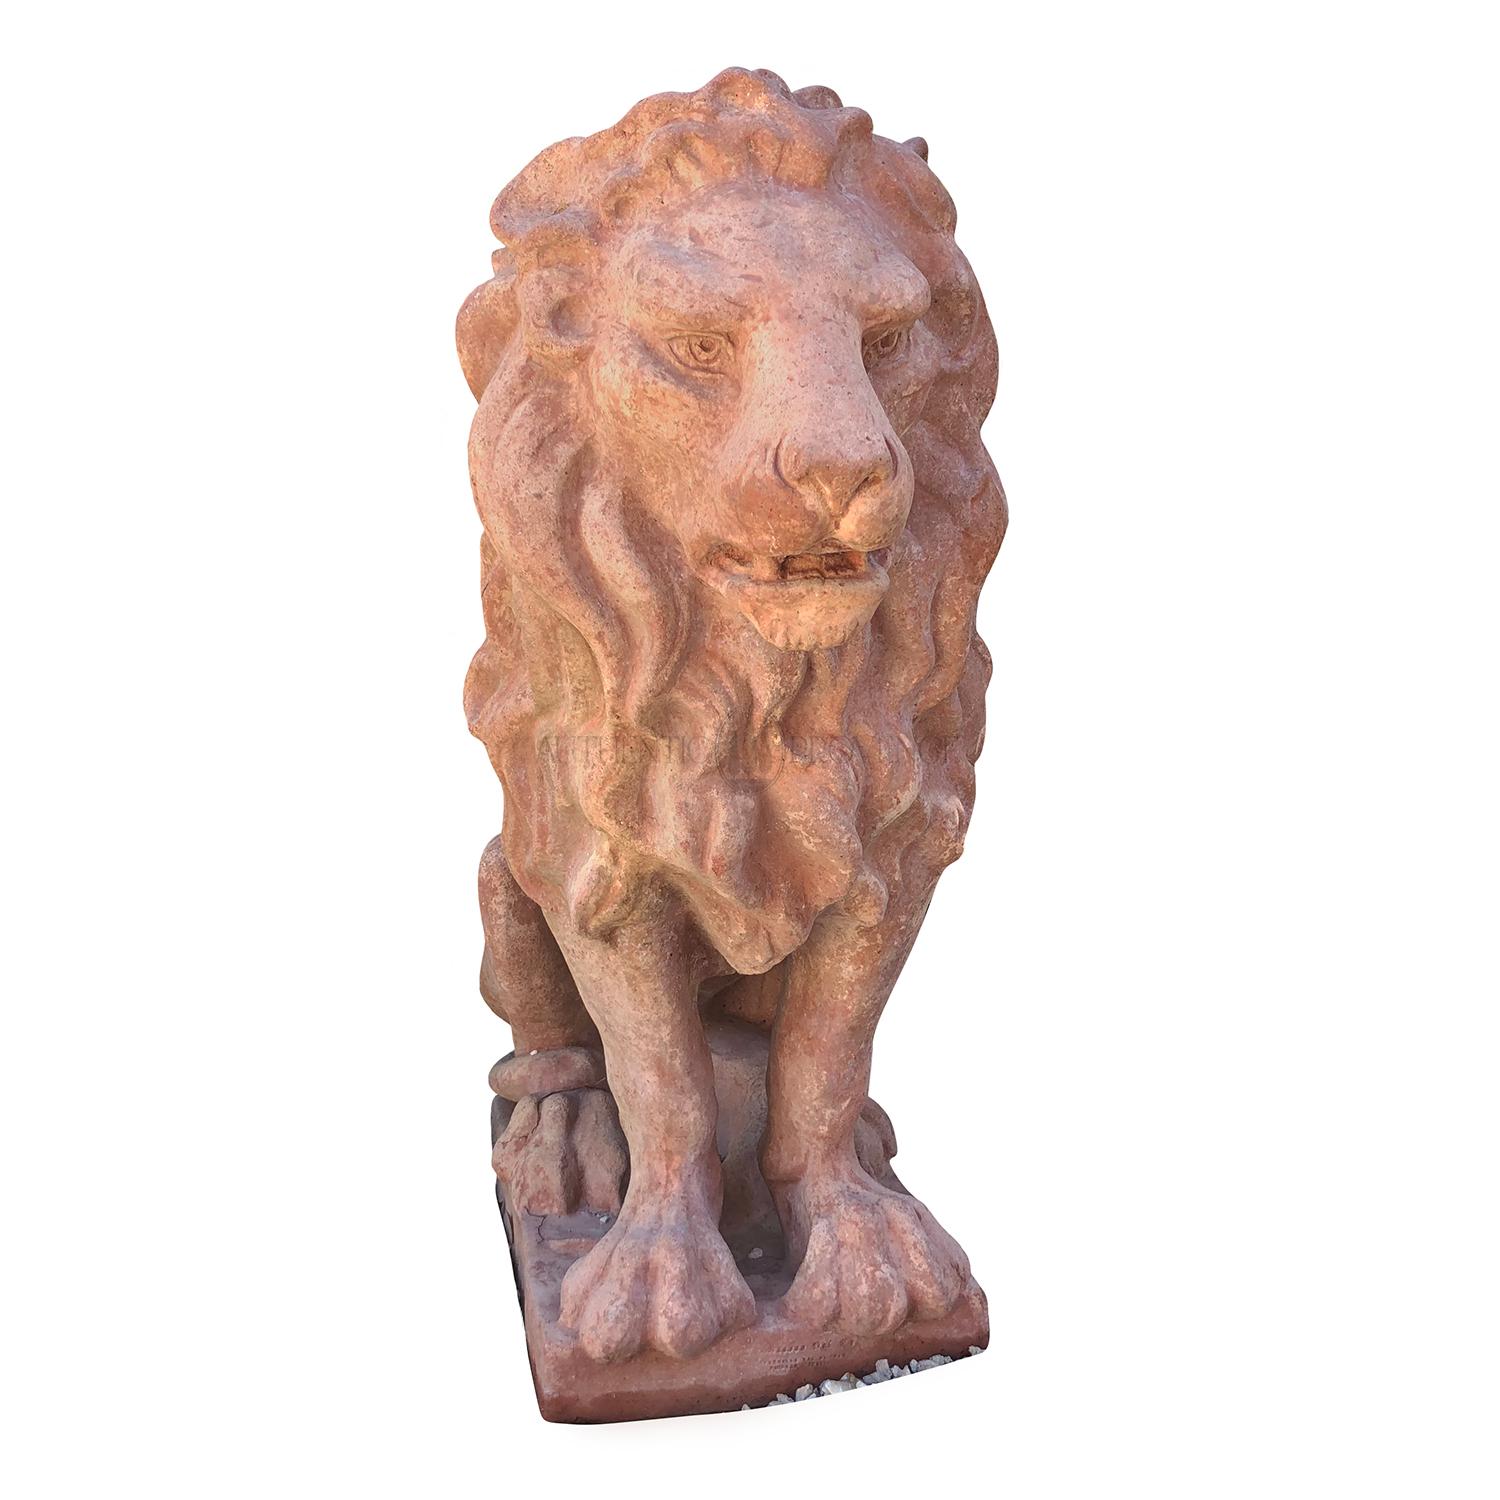 A vintage Italian classic Tuscan terracotta clay statuette of a regal lion in a guardian position, in good condition. Wear consistent with age and use, circa 1910-1920, Prov. Tuscany, Italy.